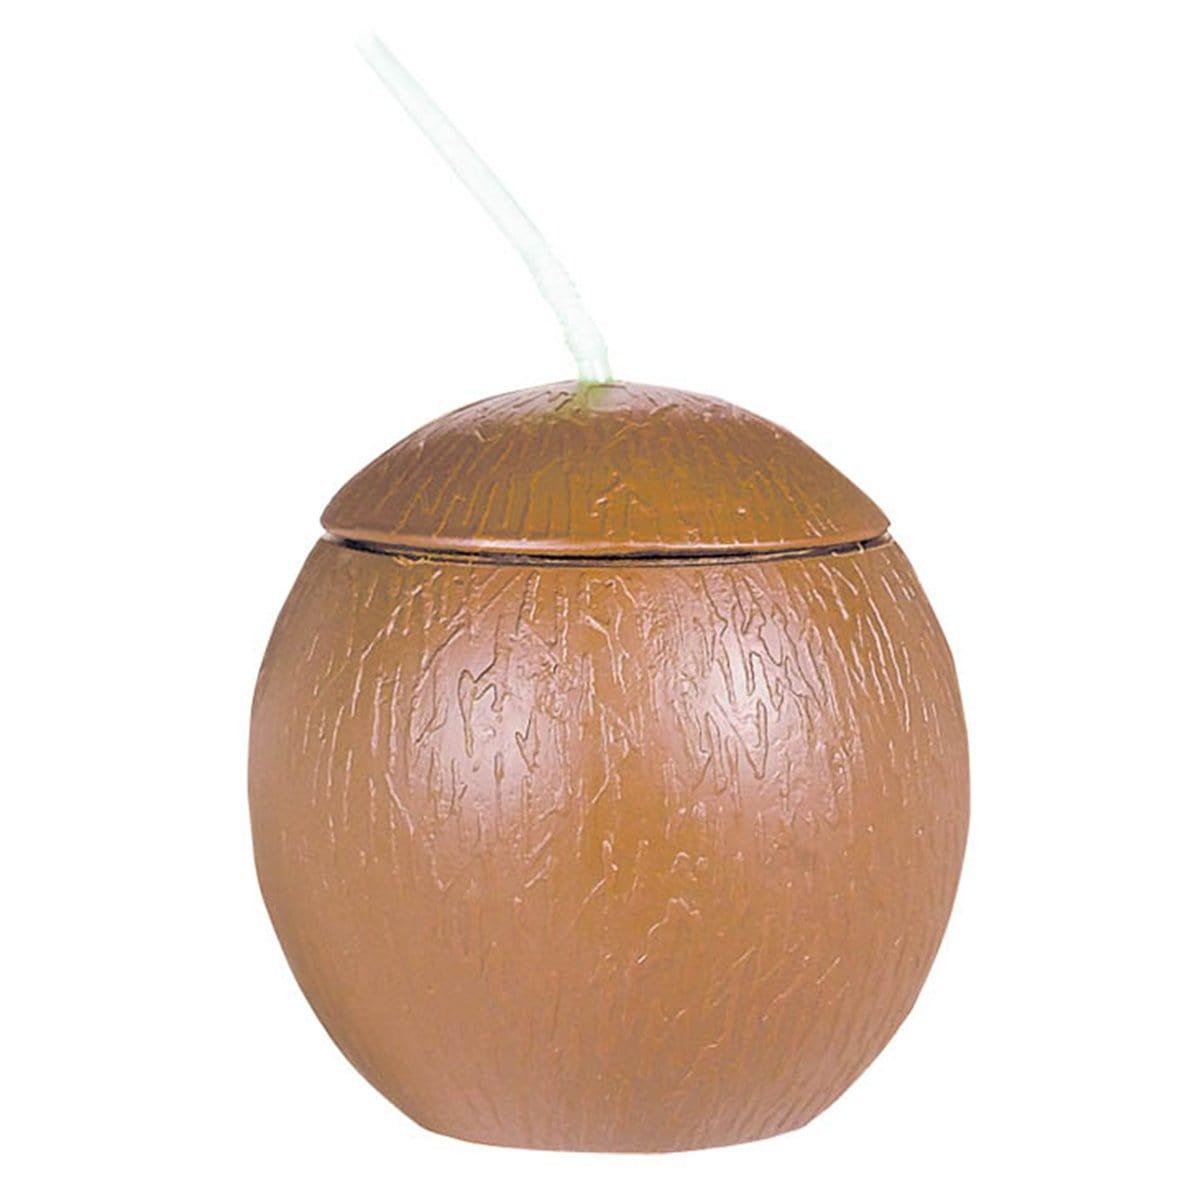 Buy Theme Party Coconut Cup with Straw sold at Party Expert